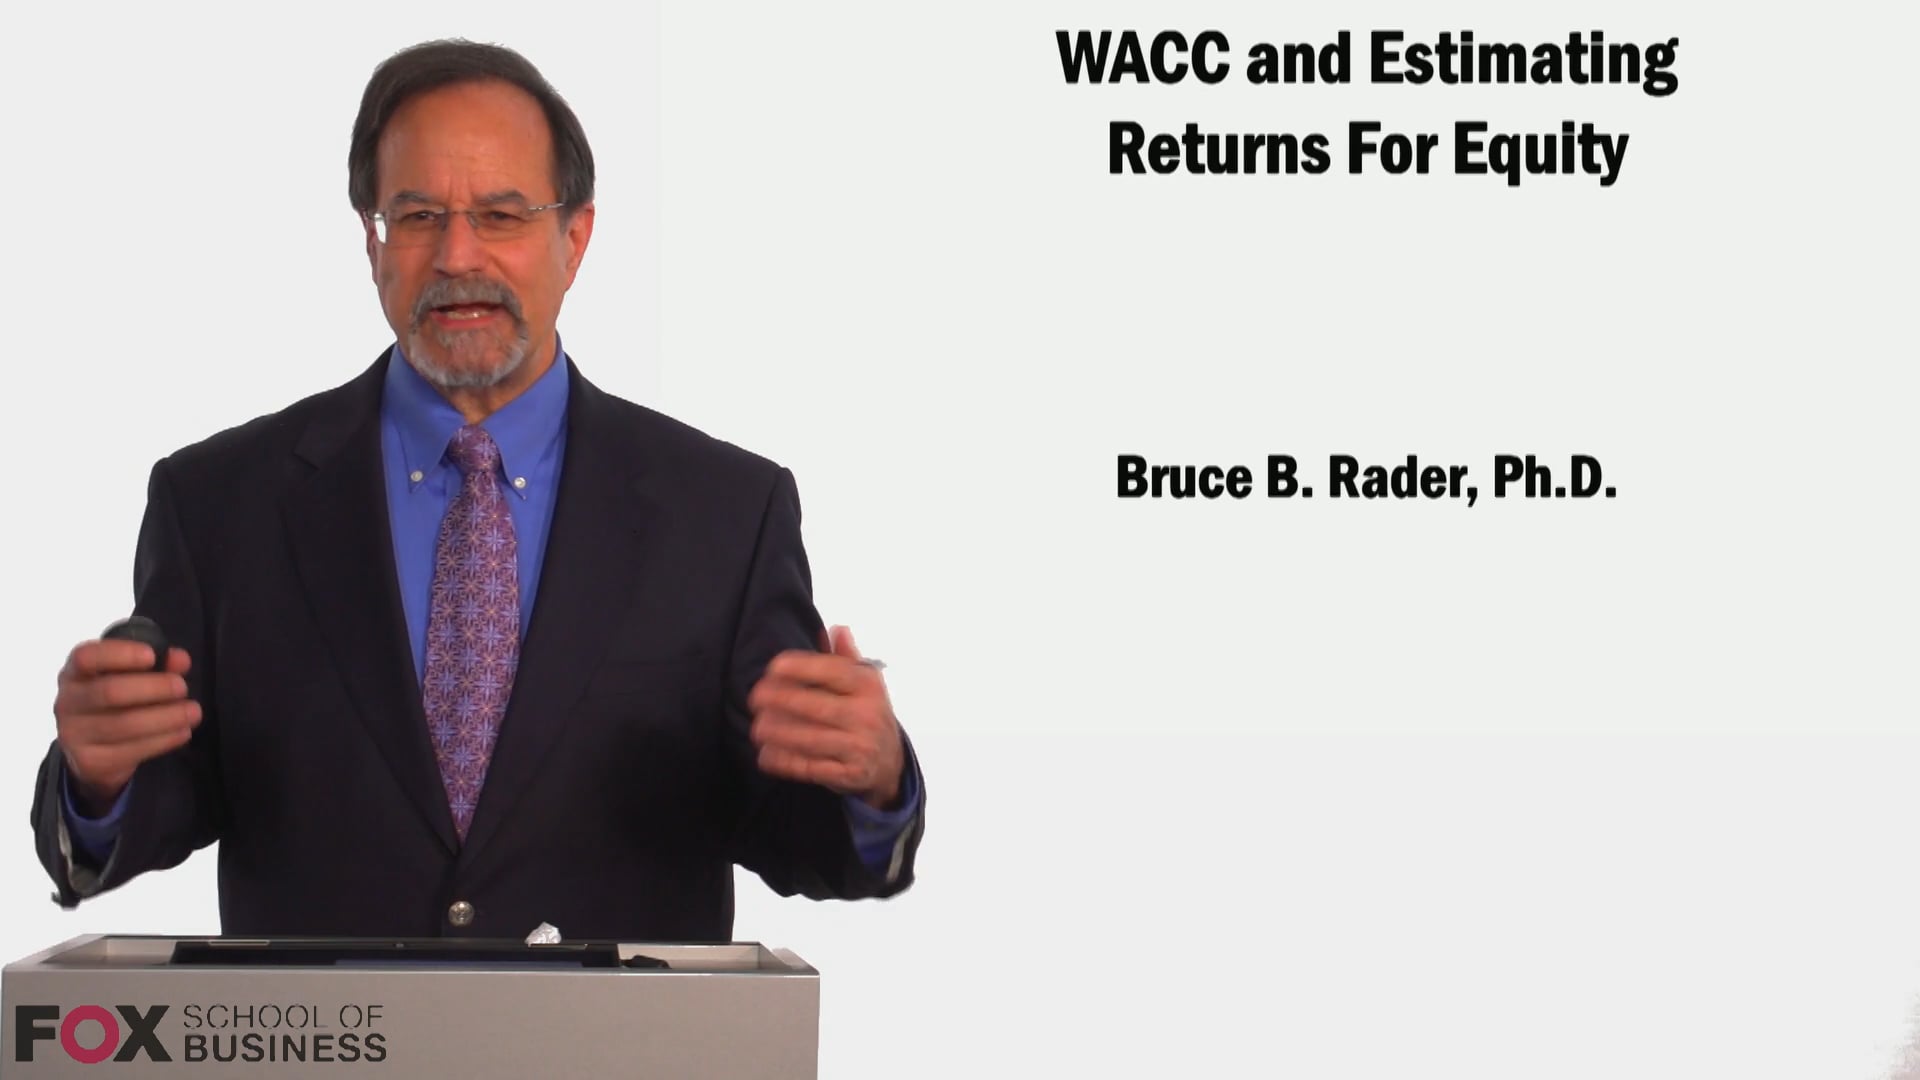 WACC Estimating Returns for Equity